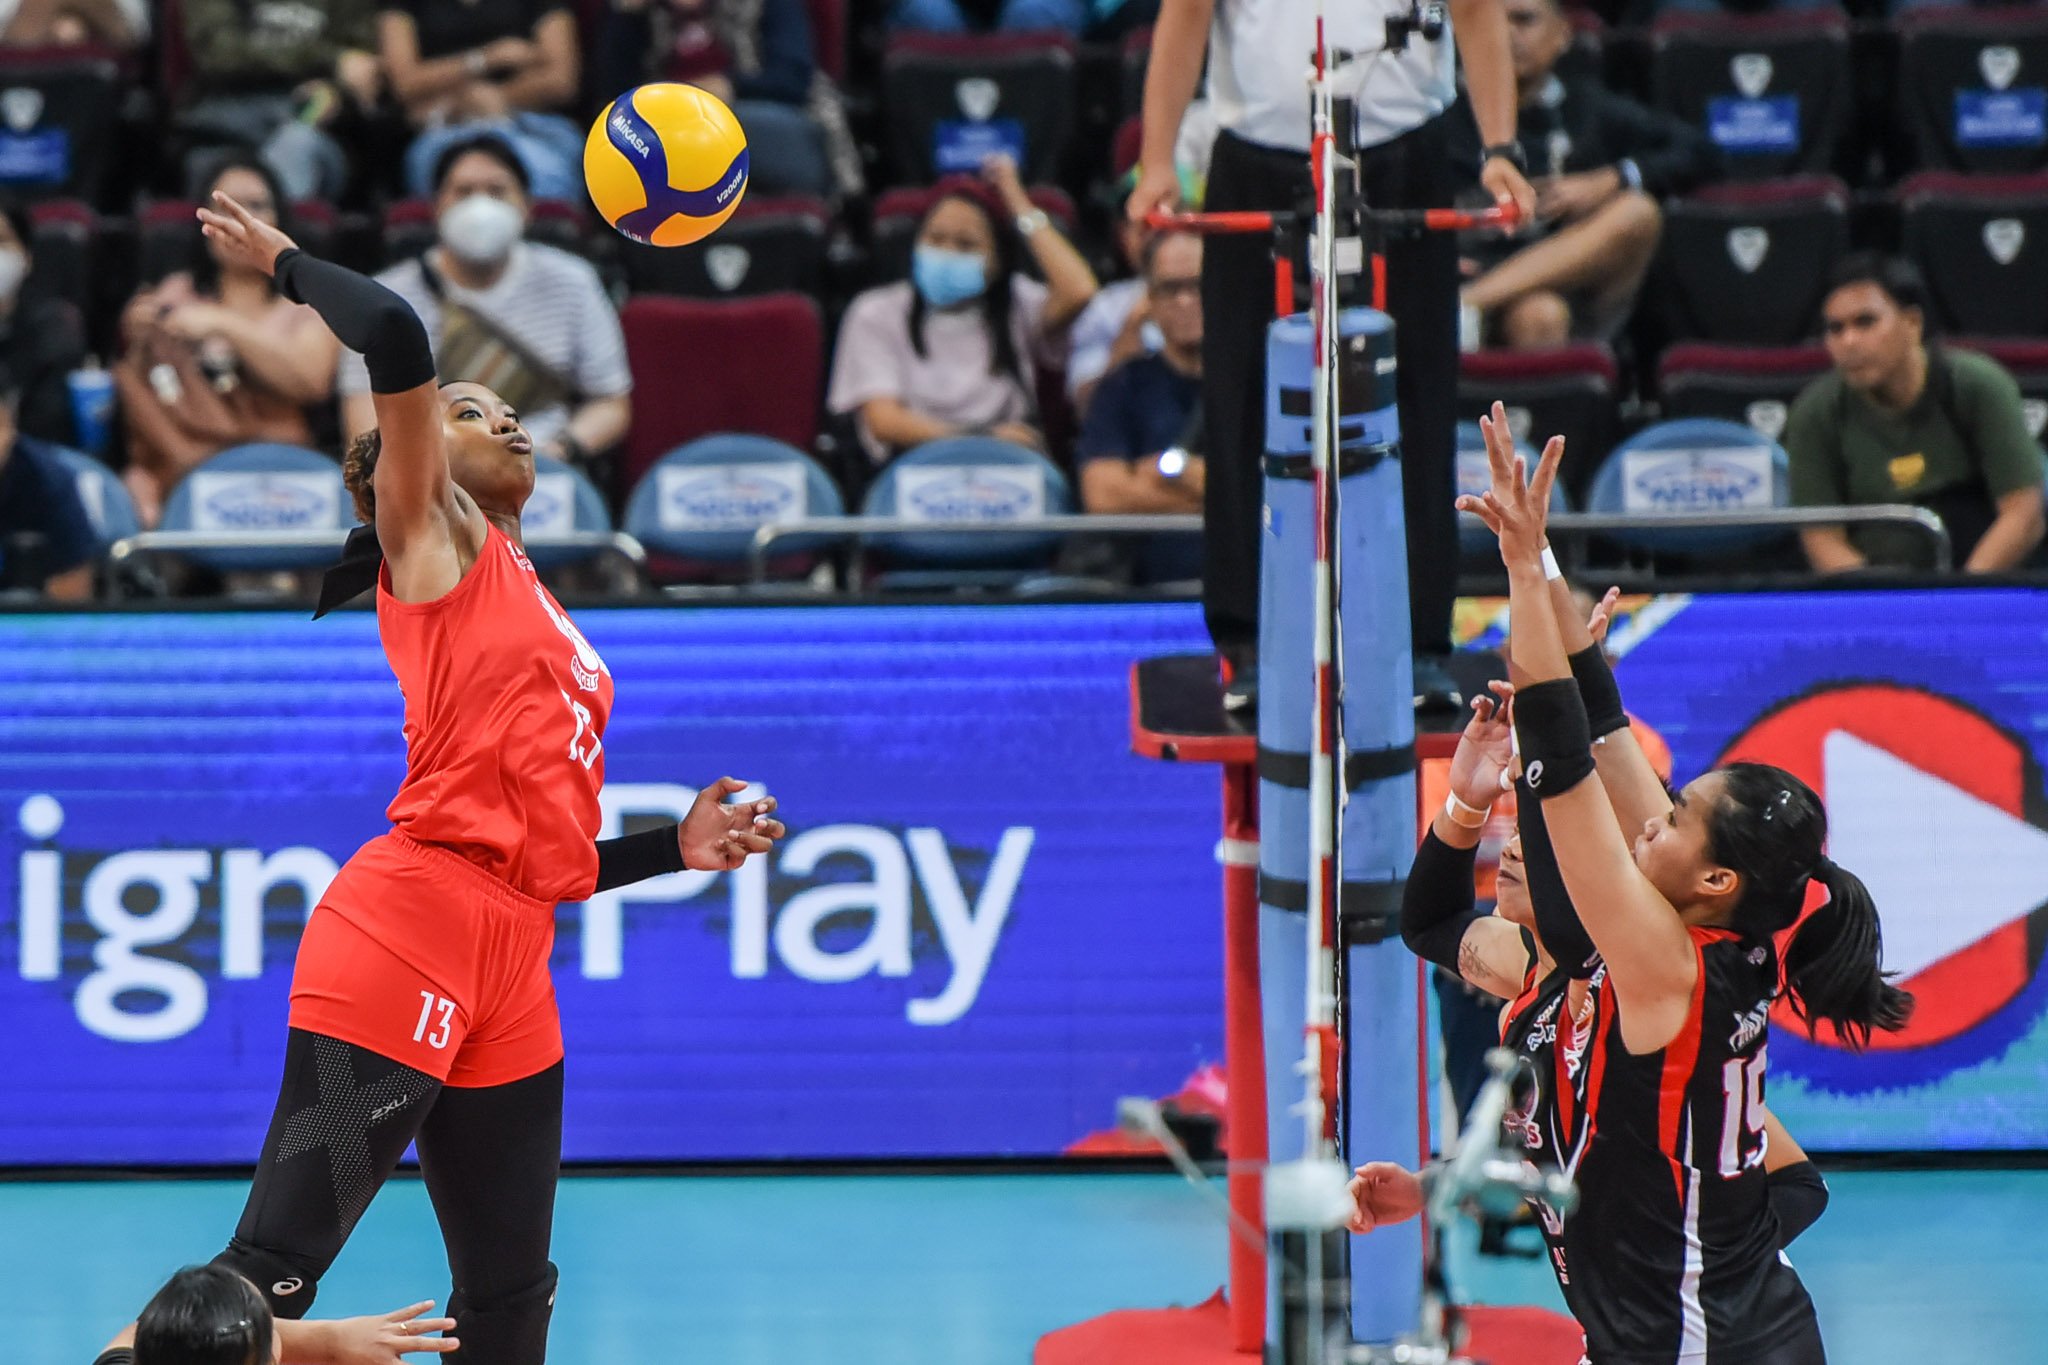 MJ Phillips is lone Filipina drafted in Korea - News PVL